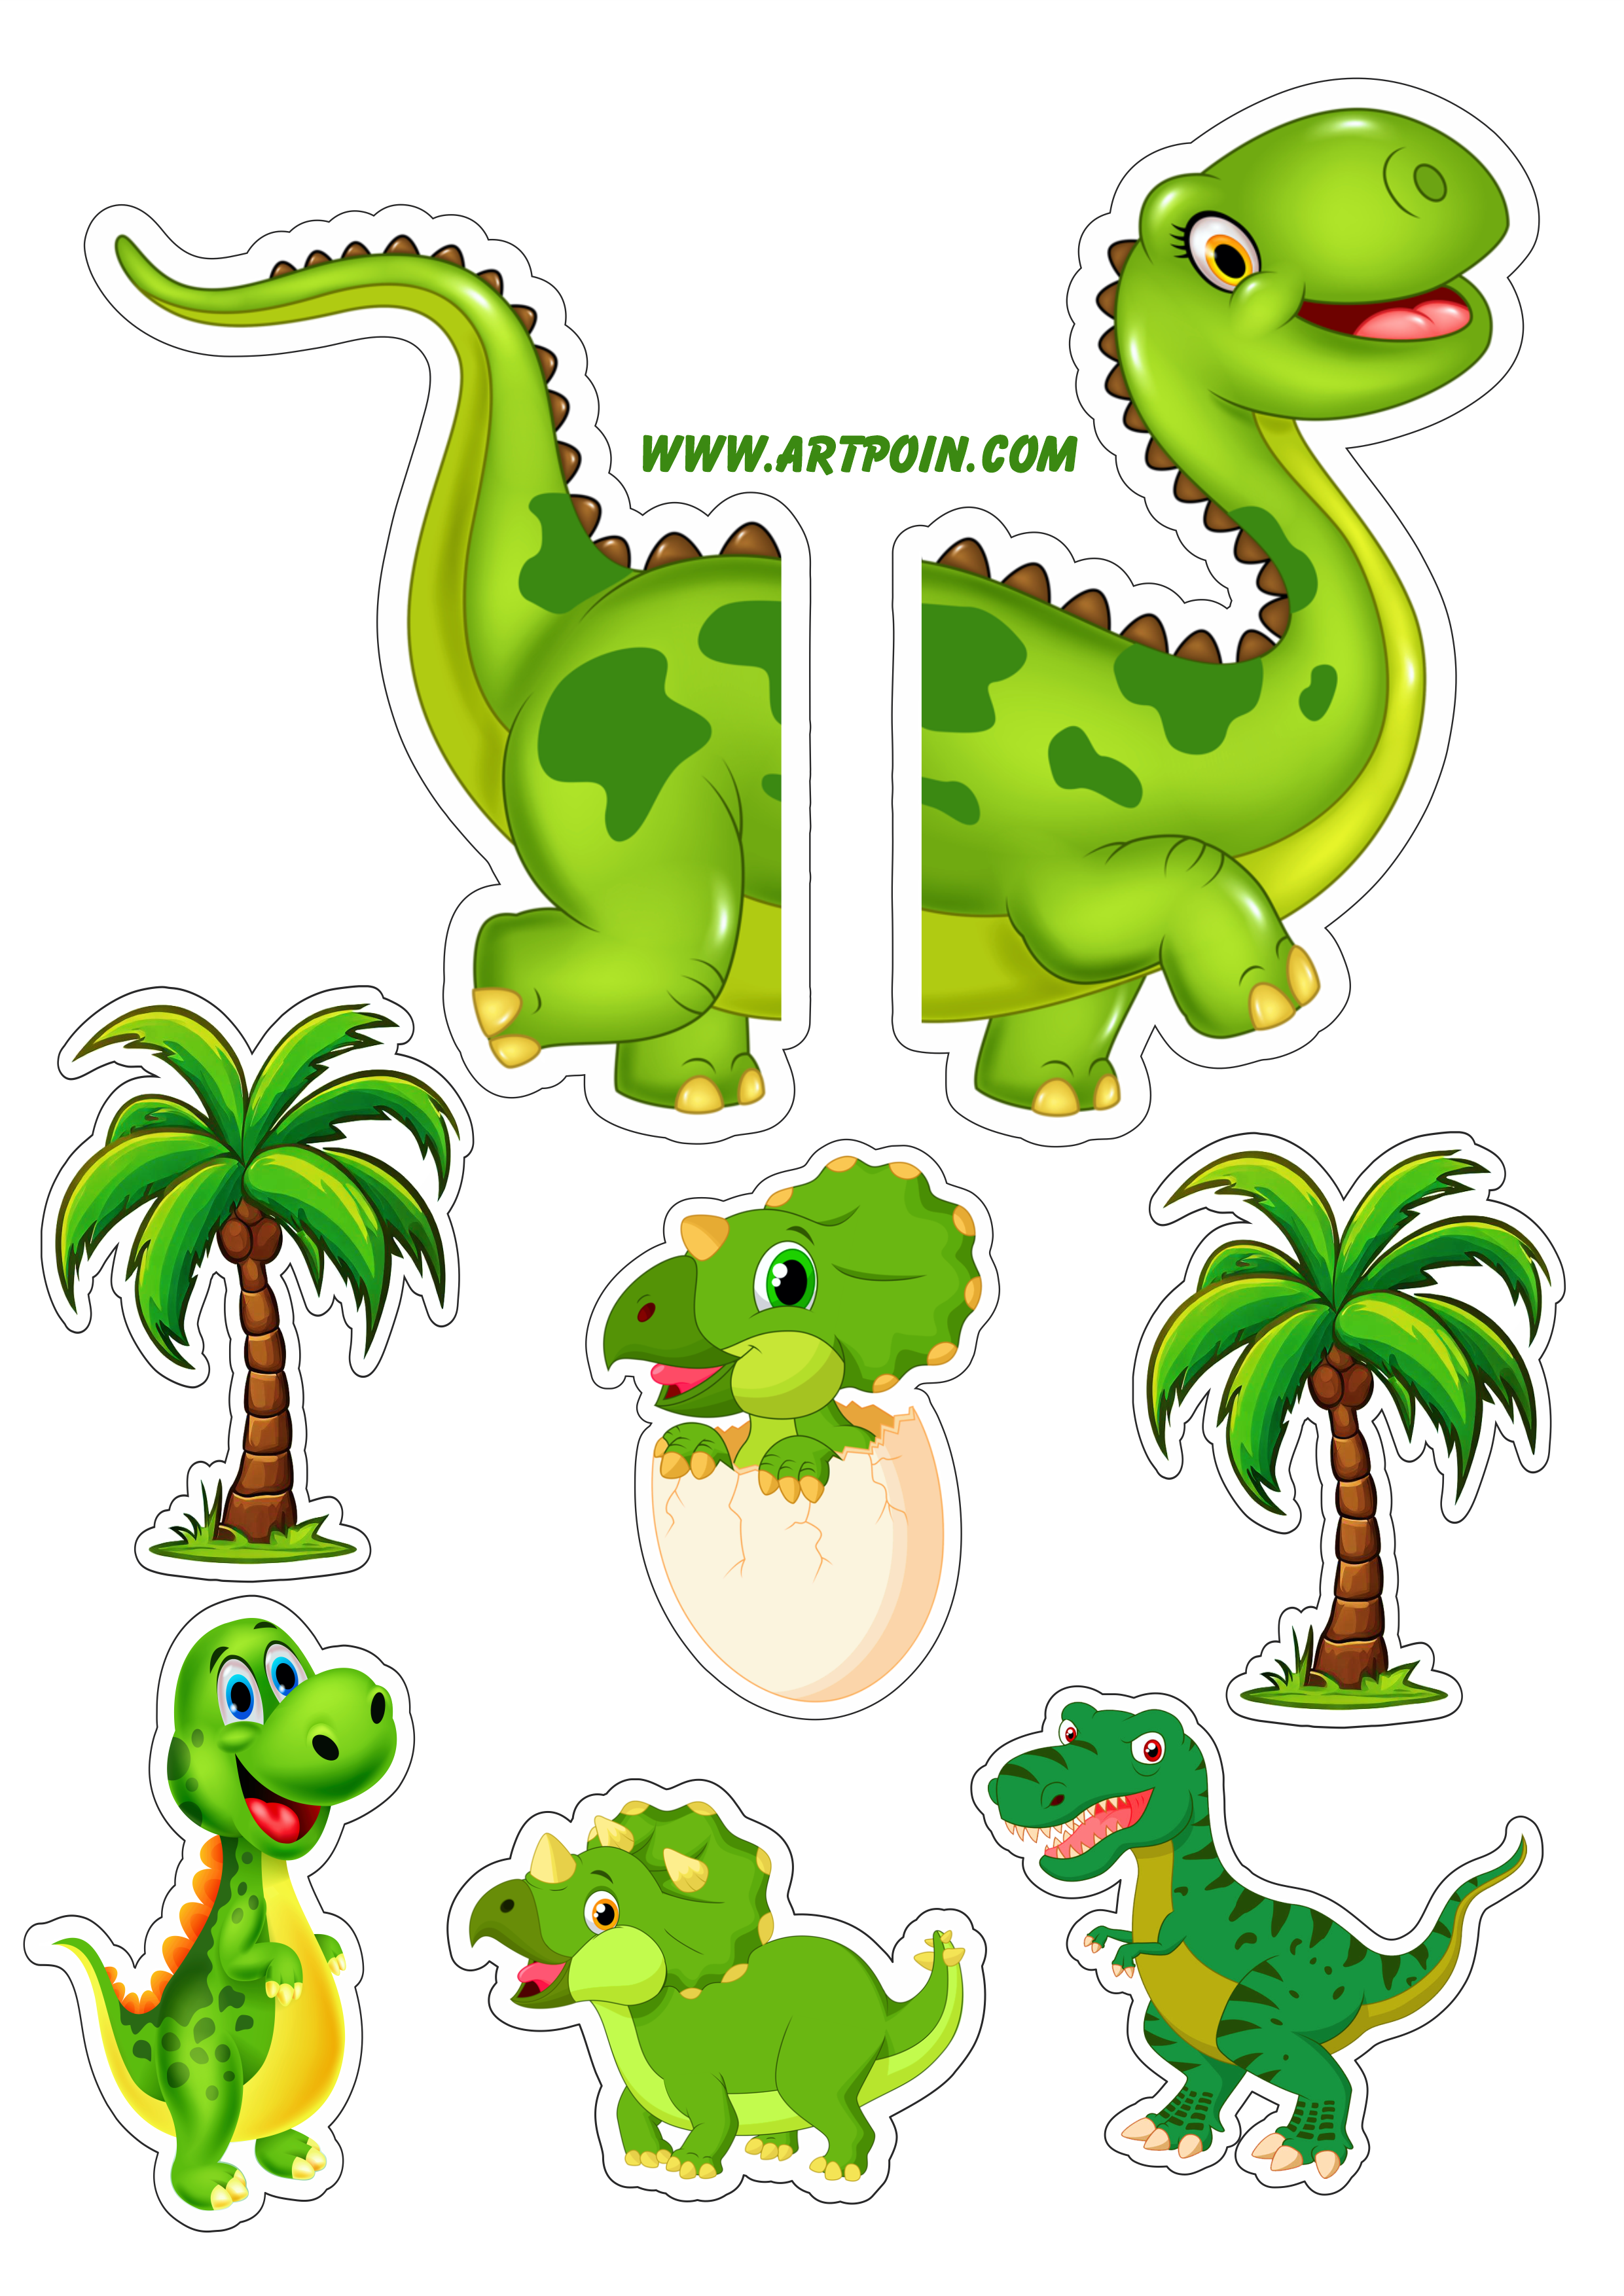 Png Dinossauros Lembrancinhas Dinossauros Png Dinossauros - Imagem Dinossauro  Png - Free Transparent PNG Clipart Images Download